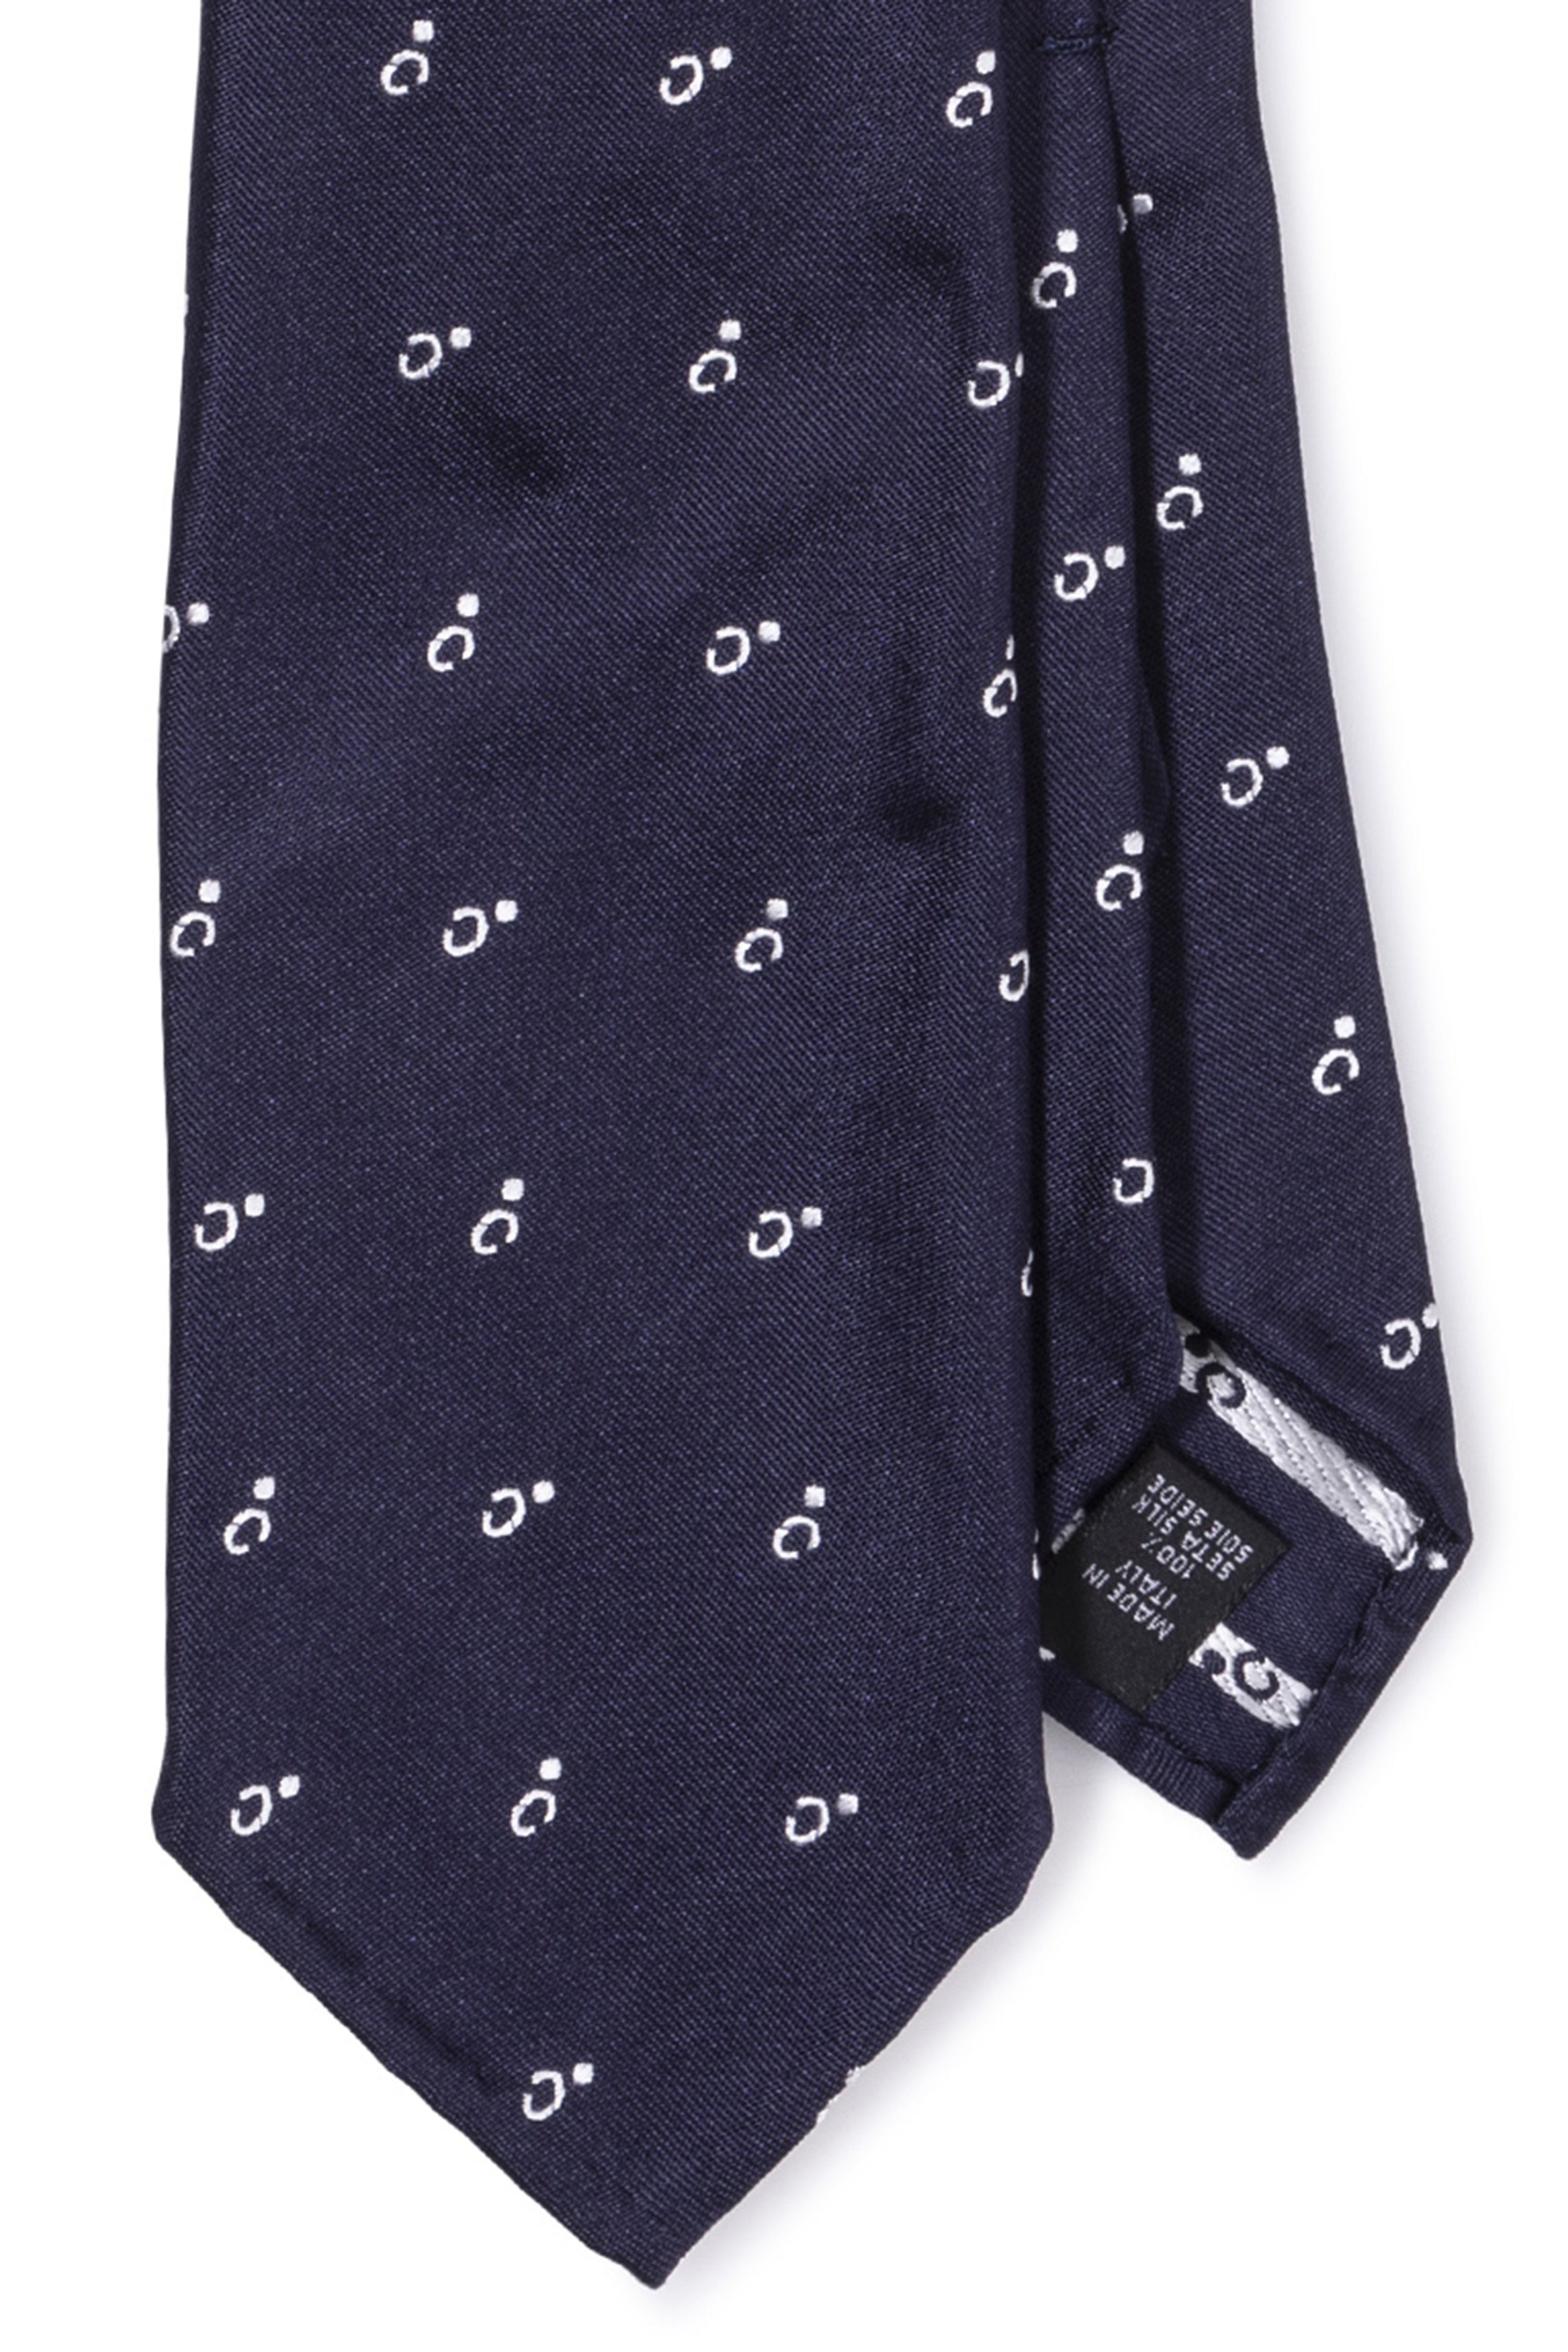 Tie Your Tie Navy with White Seven Fold Silk Jacquard Tie